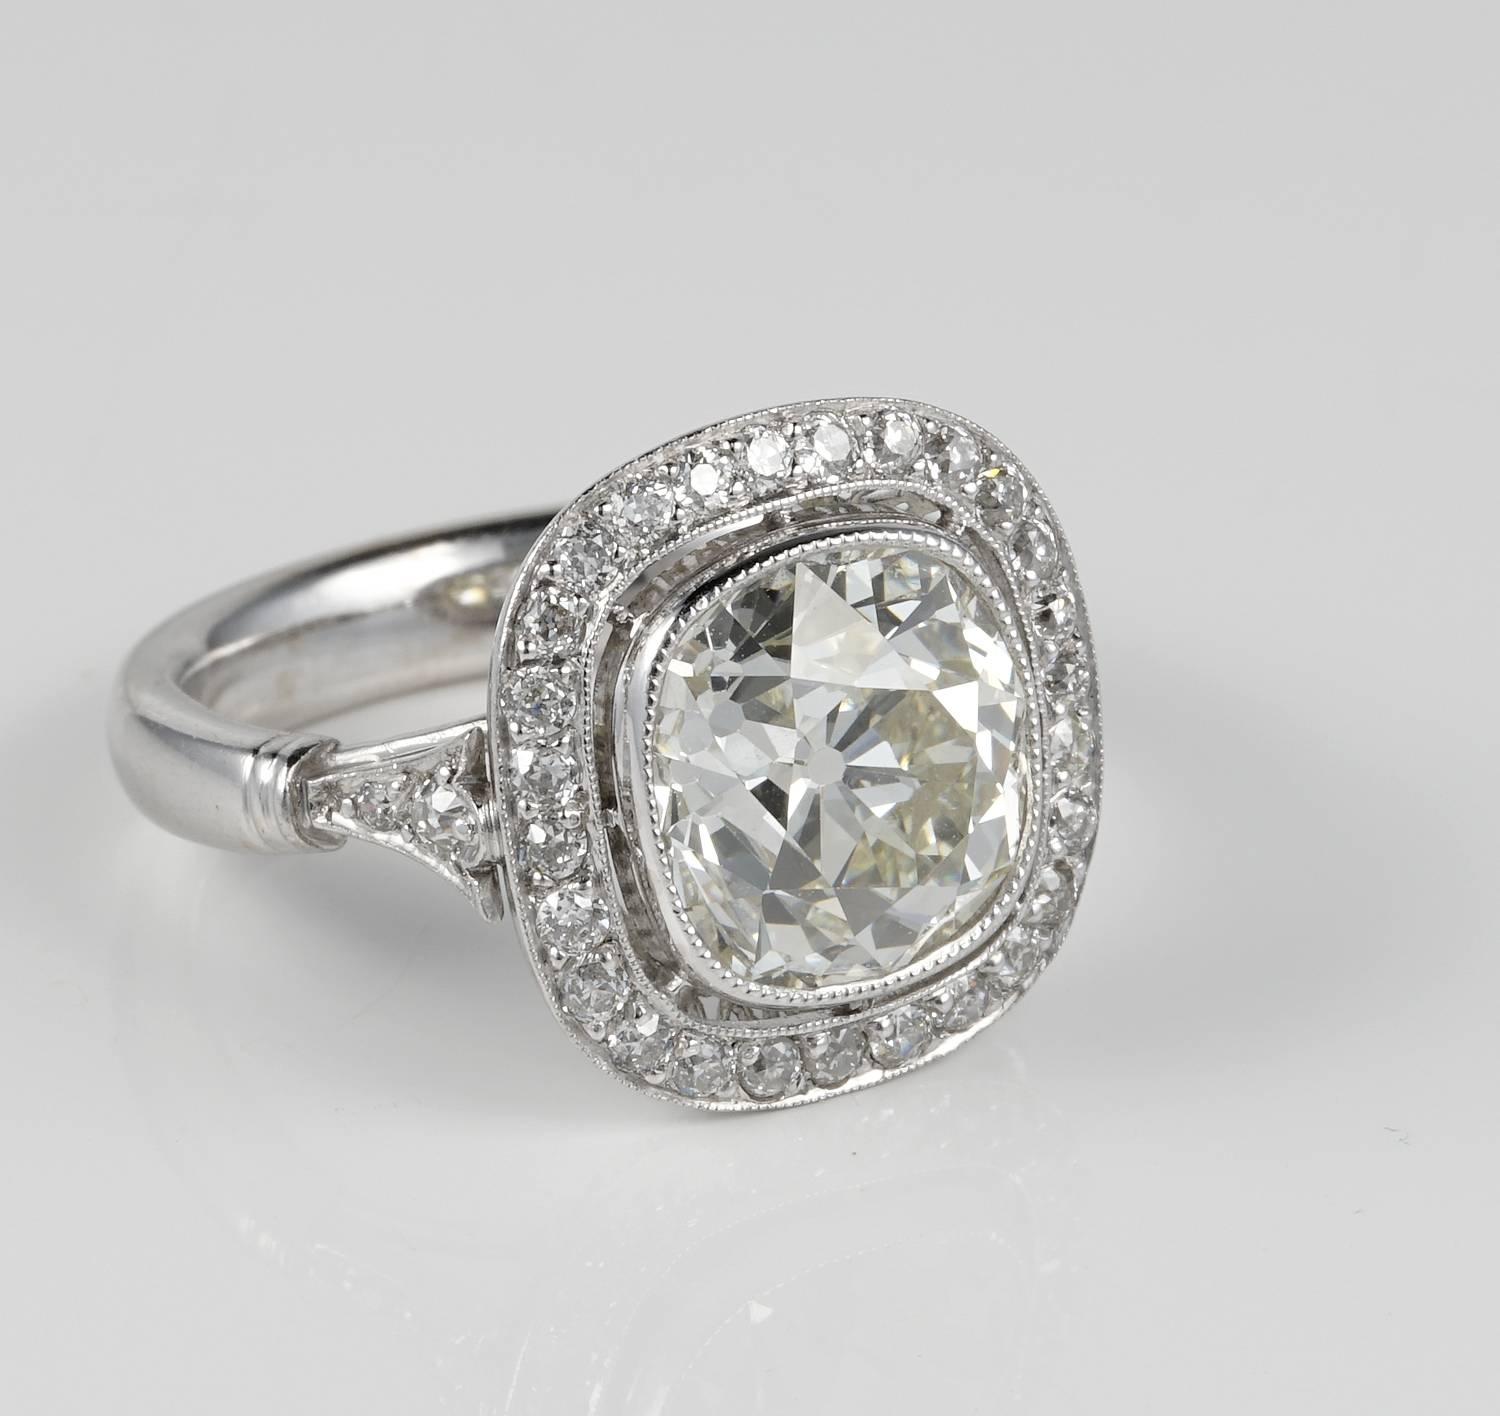 Magnificent  large Diamond solitaire ring
Crafted in Platinum - not marked
Semplicity in design to maximize the beauty of the centre old mine cushion cut Diamond 4.20 Ct in weight rated as J /VVS
up in colour grade finest in clarity and cut